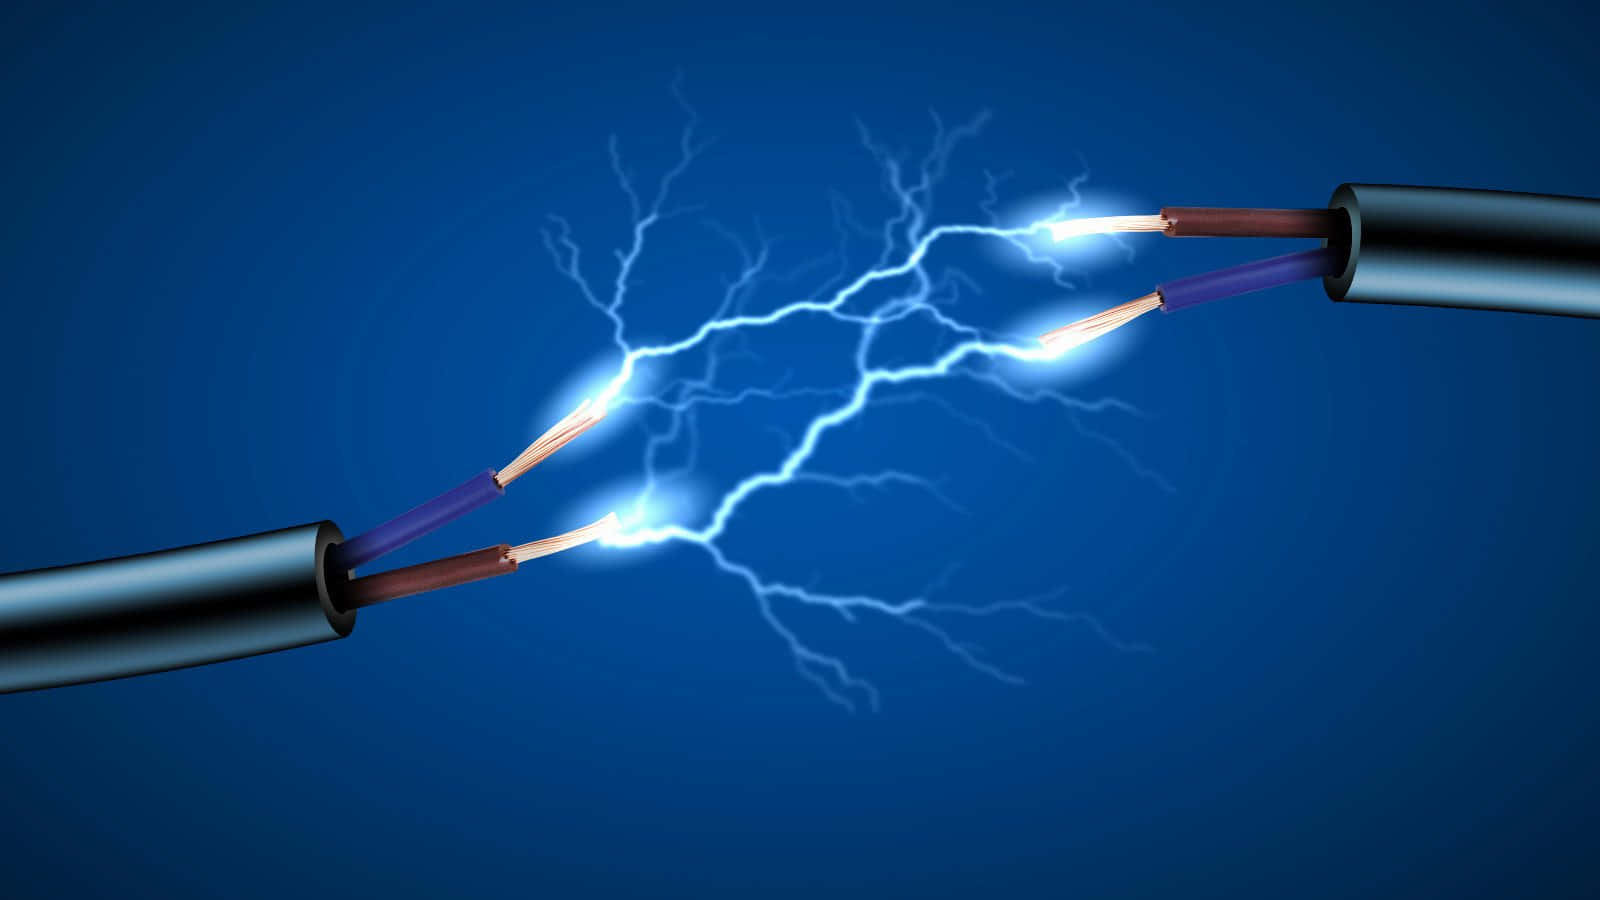 Two Electrical Wires With Electric Sparks Wallpaper